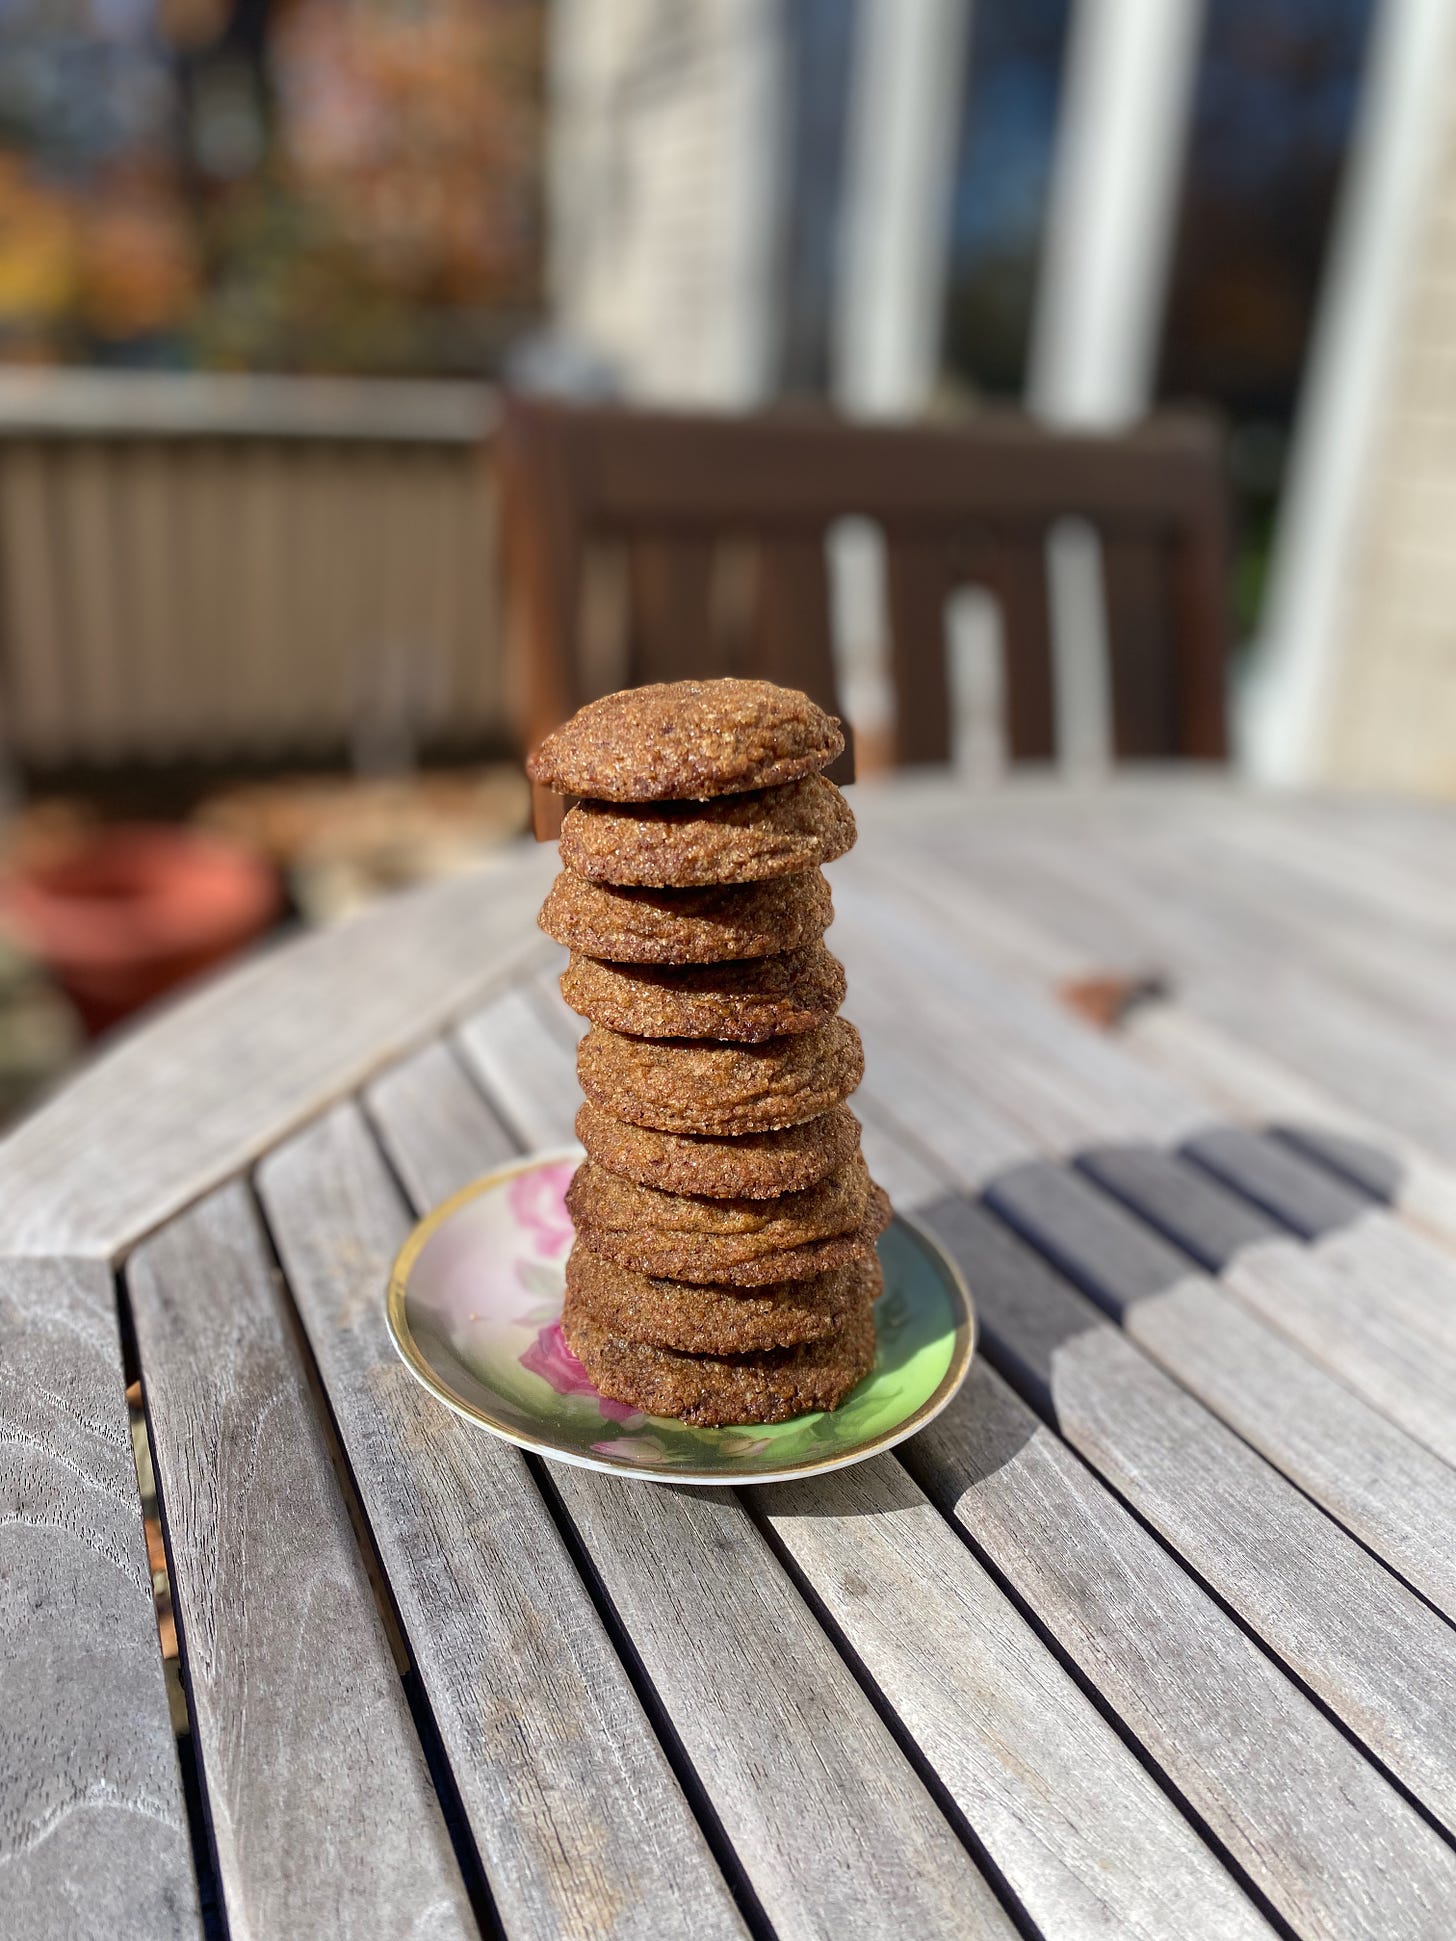 A tall stack of ten gingersnap cookies on a small hand-painted ceramic saucer sitting on a wooden porch table.